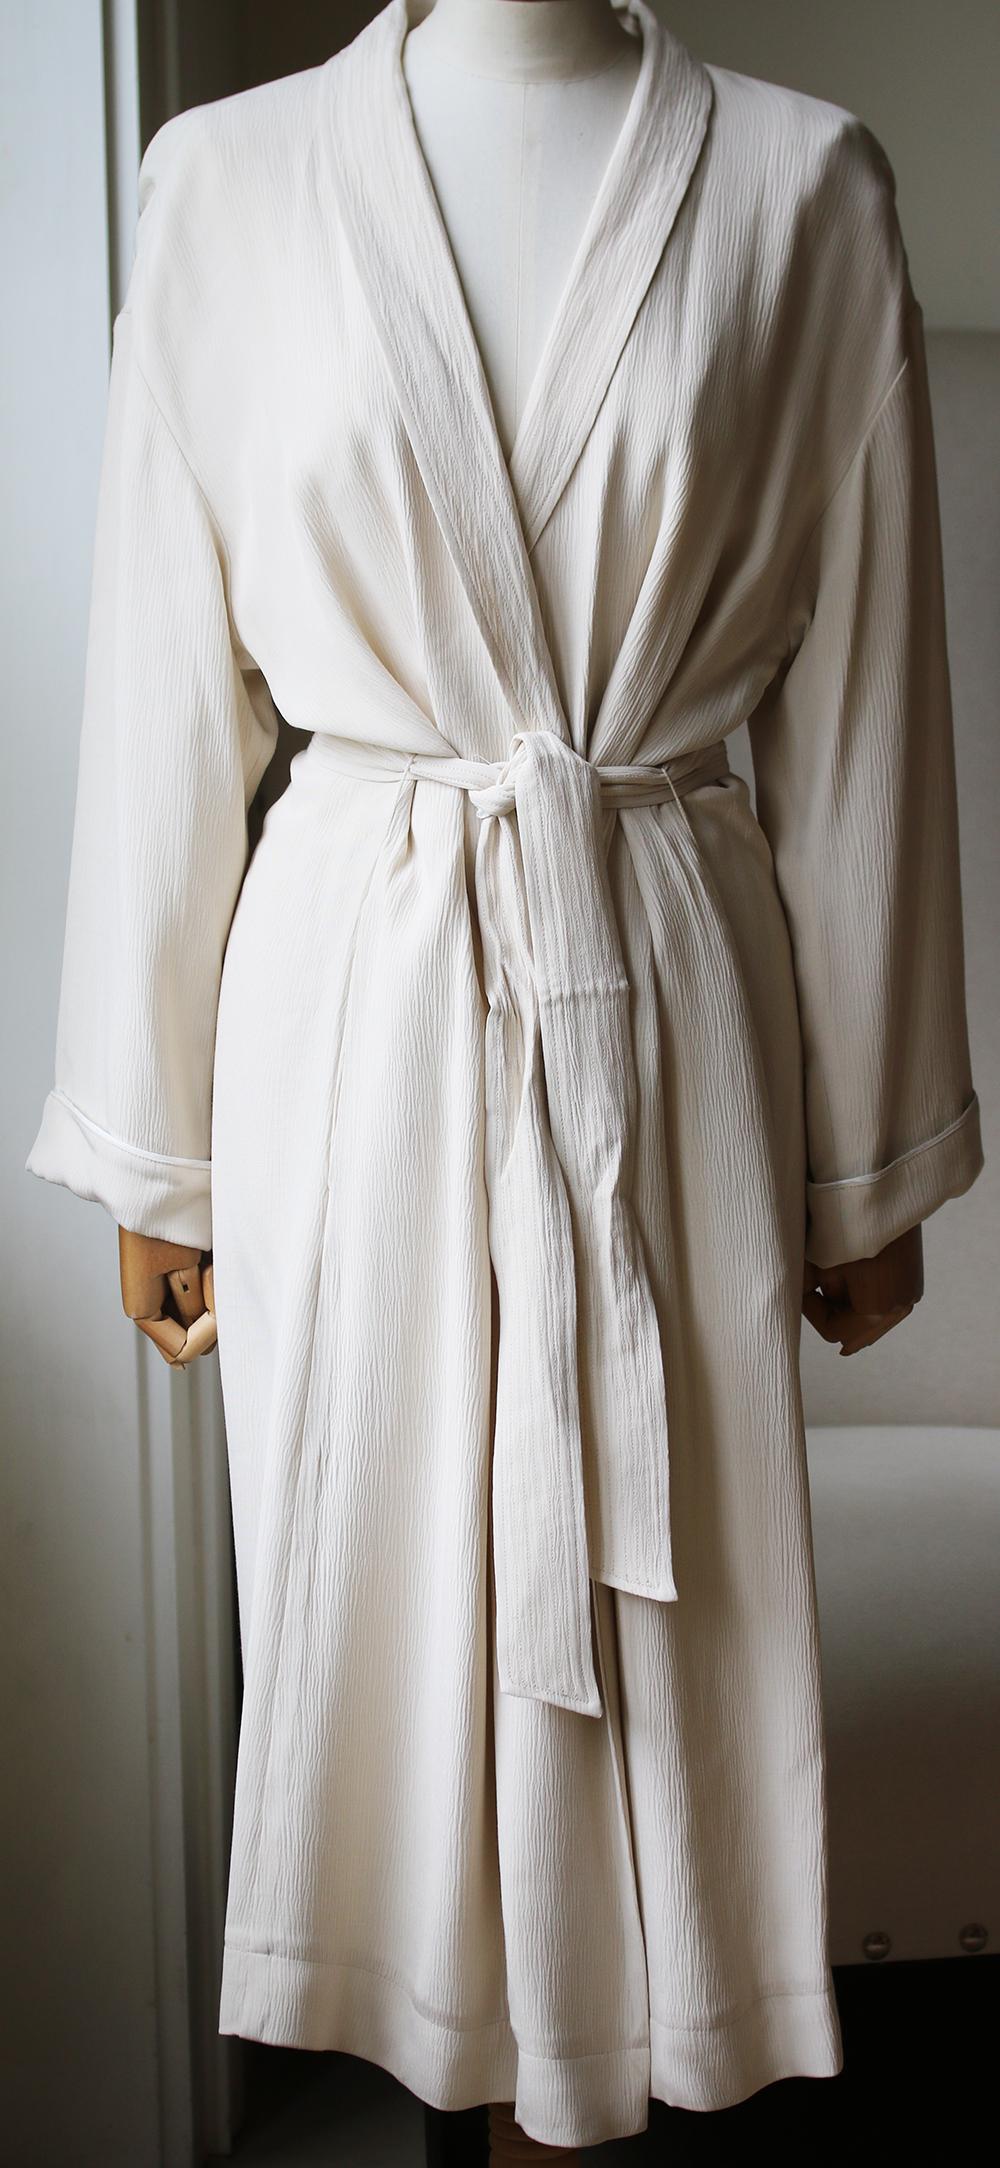 Cream long belted coat from Forte Forte featuring an open front, a belted waist, long sleeves, a long length and a straight hem. 100% Viscose. Lining: 60% Acetate, 40% viscose.

Size: III (UK 12, US 8, FR 40, IT 44)

Condition: As new condition, no